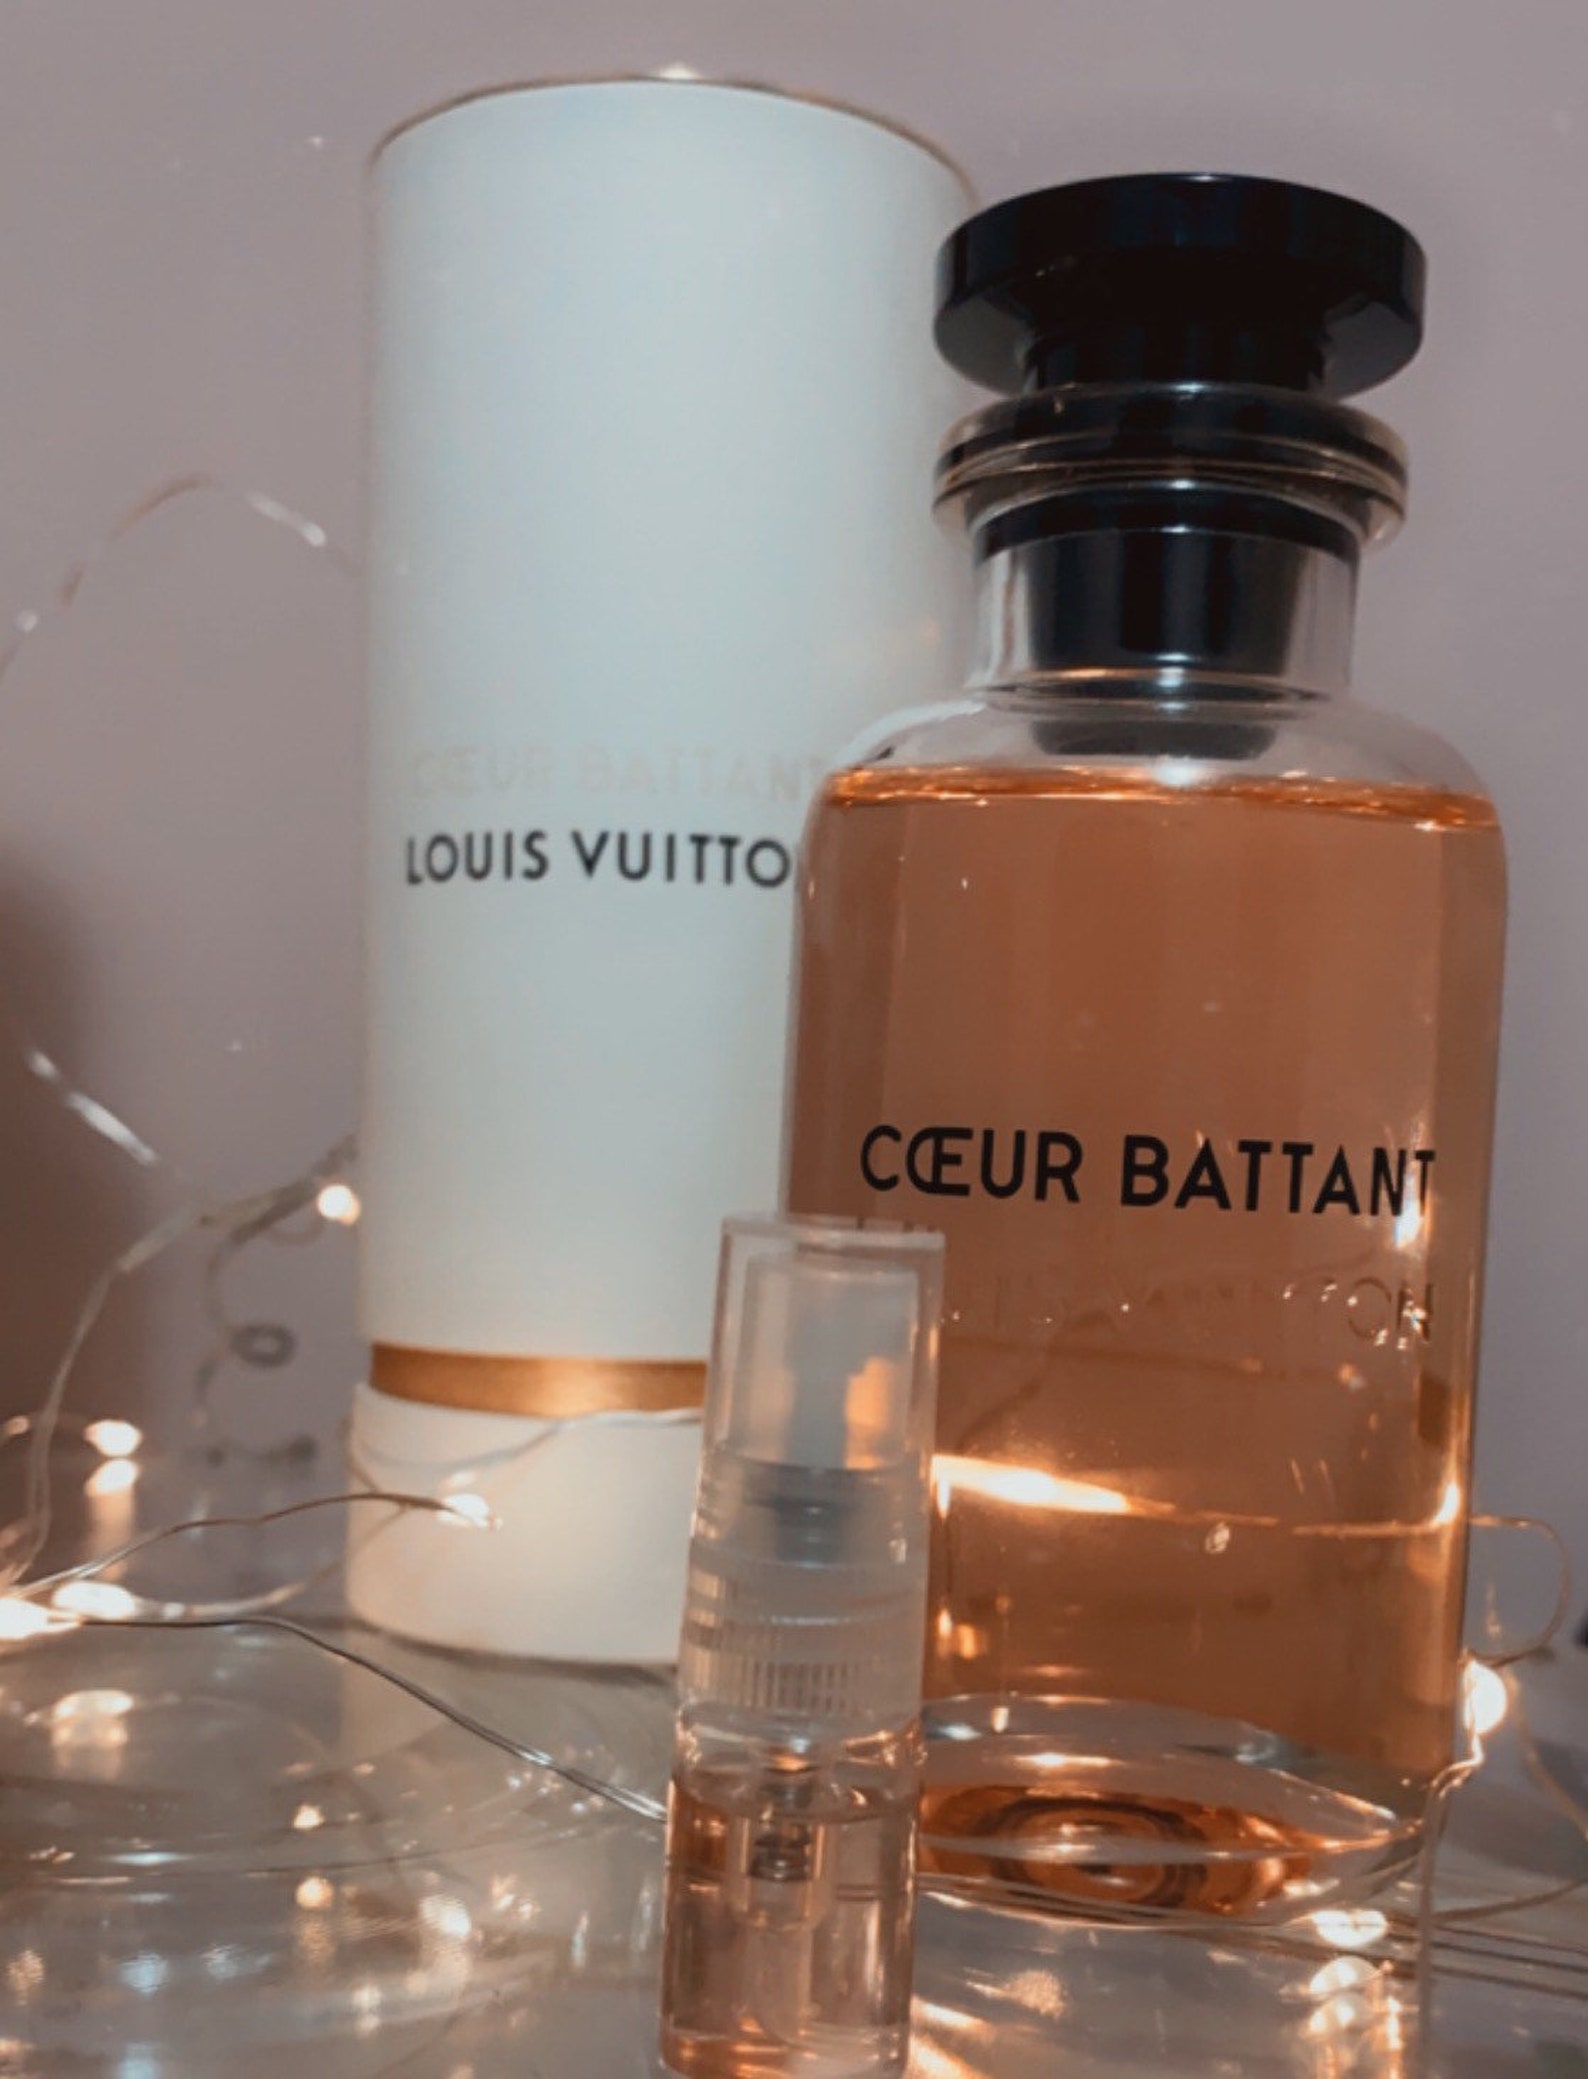 Our Duplication of CCEUR BATTANT by LOUIS VUITTON #15